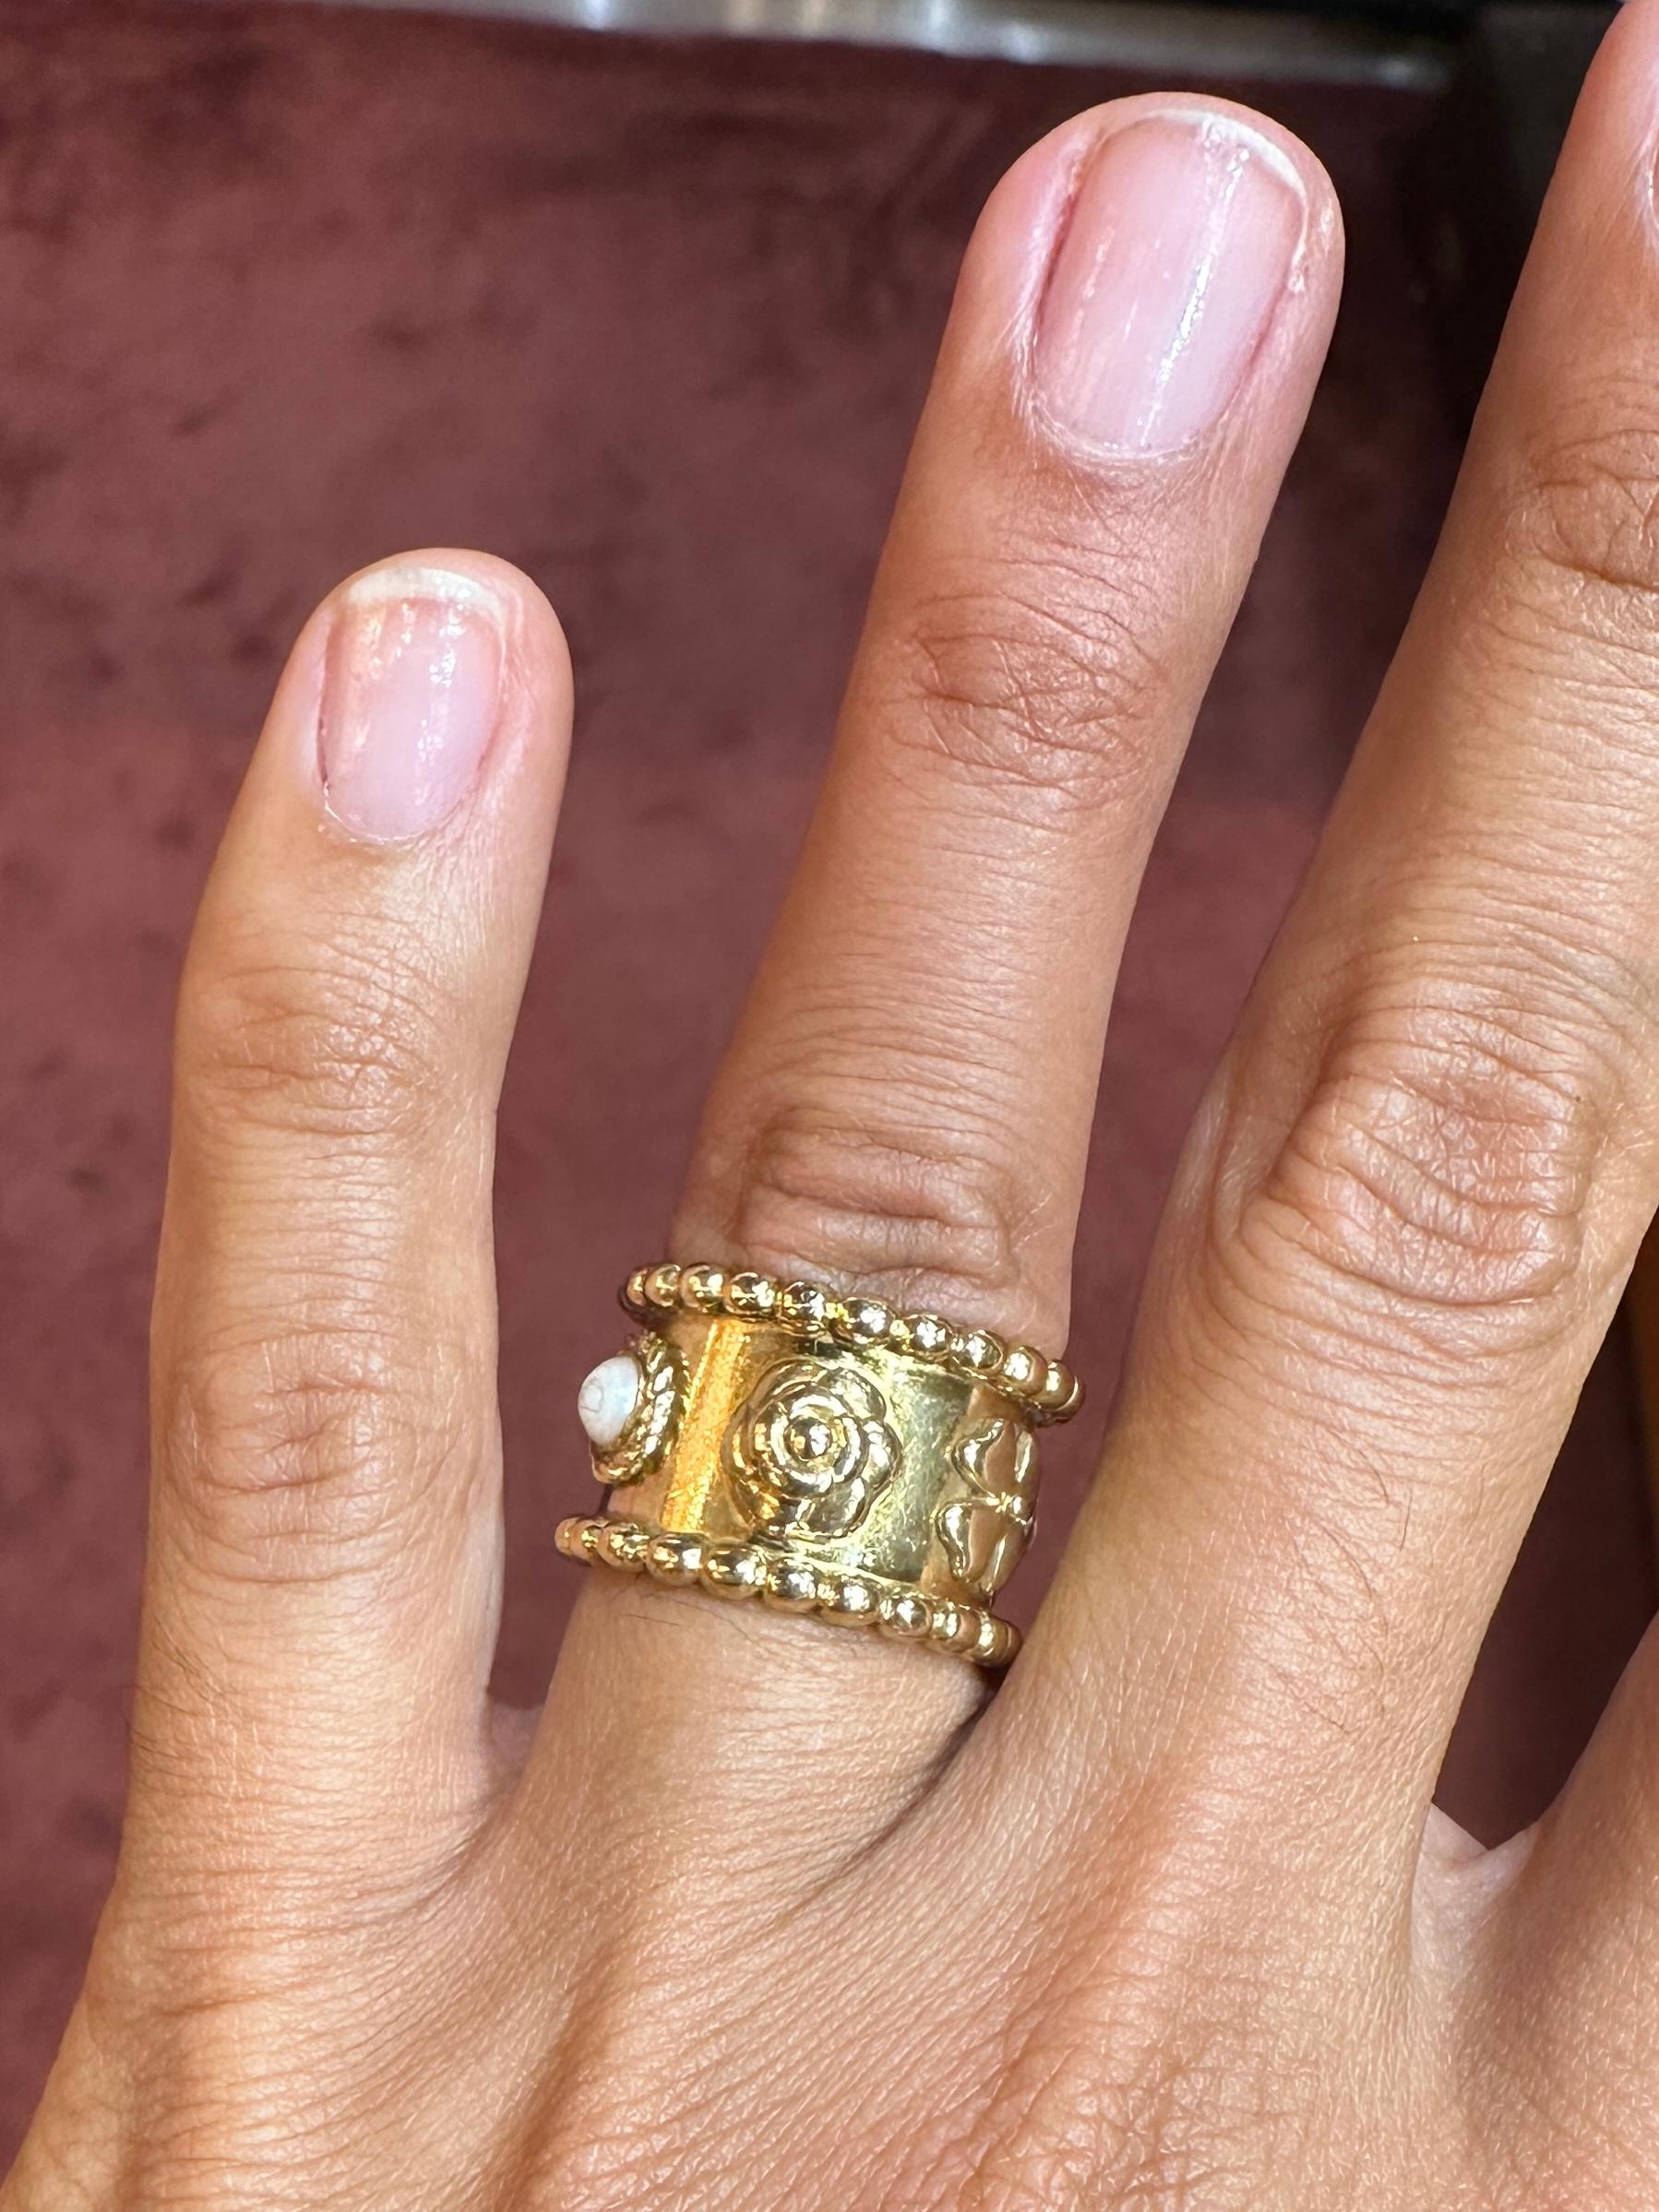 Fabulous Chanel 'Camelia' Ring. Its 18k yellow gold band has been masterfully crafted with exterior floral designs and parallel bead-style borders on either side, while its matching top and bottom pearls conclude its fine sense of symmetry. Of